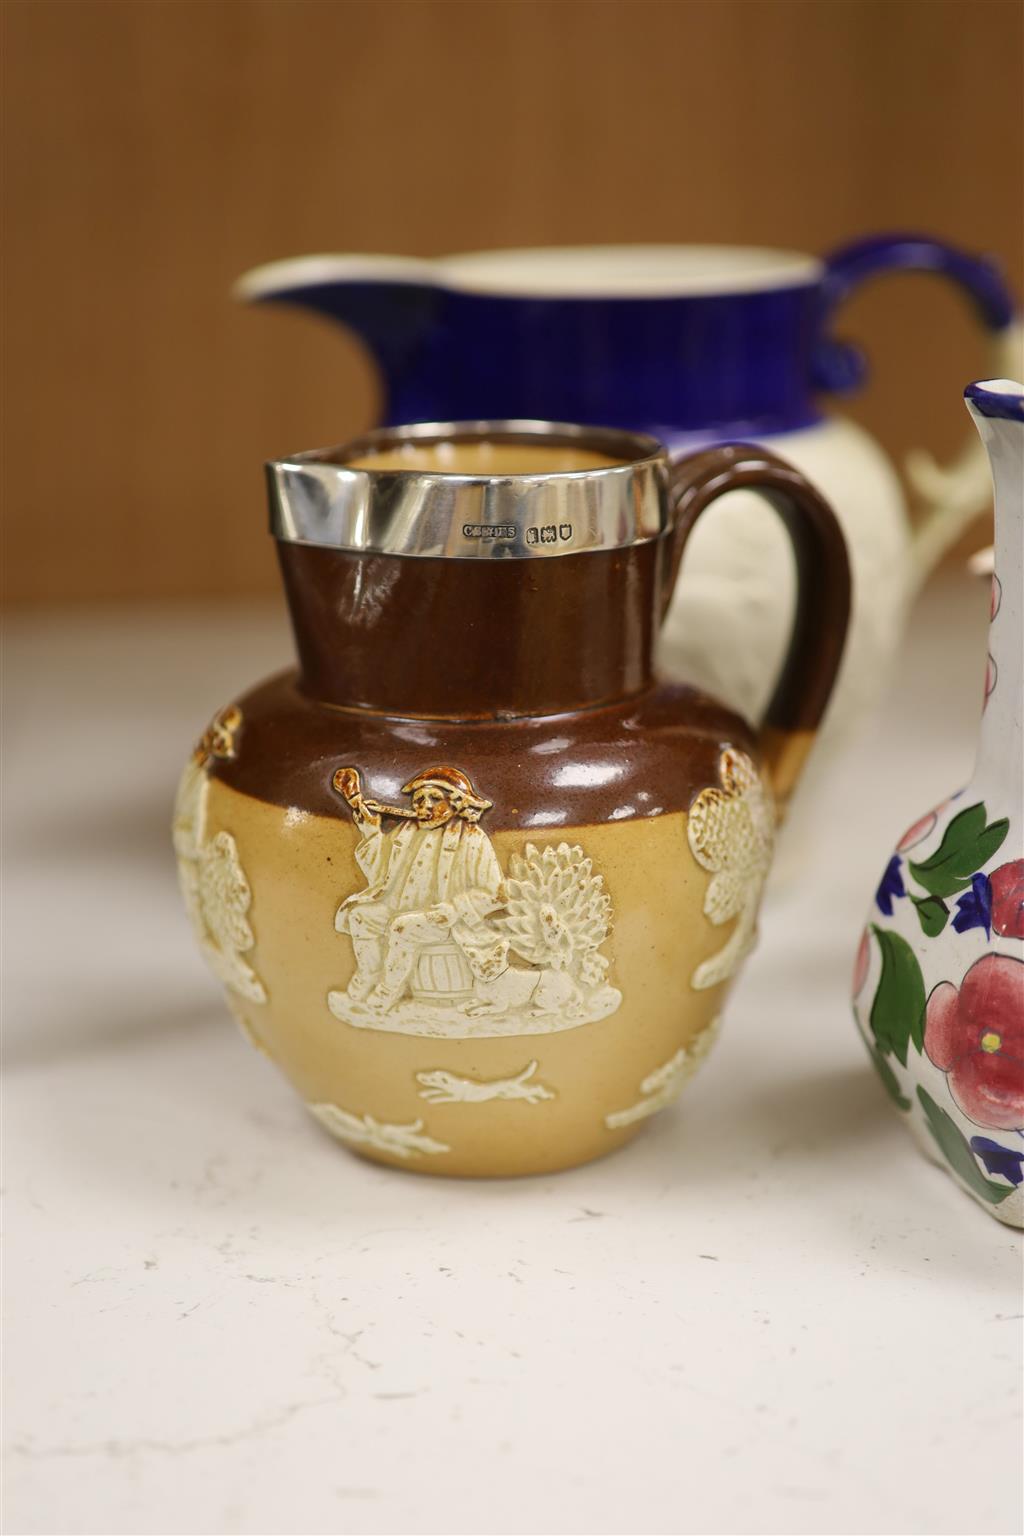 A Royal Doulton Lambeth silver rimmed jug and other various jugs including Copeland, lustreware etc.